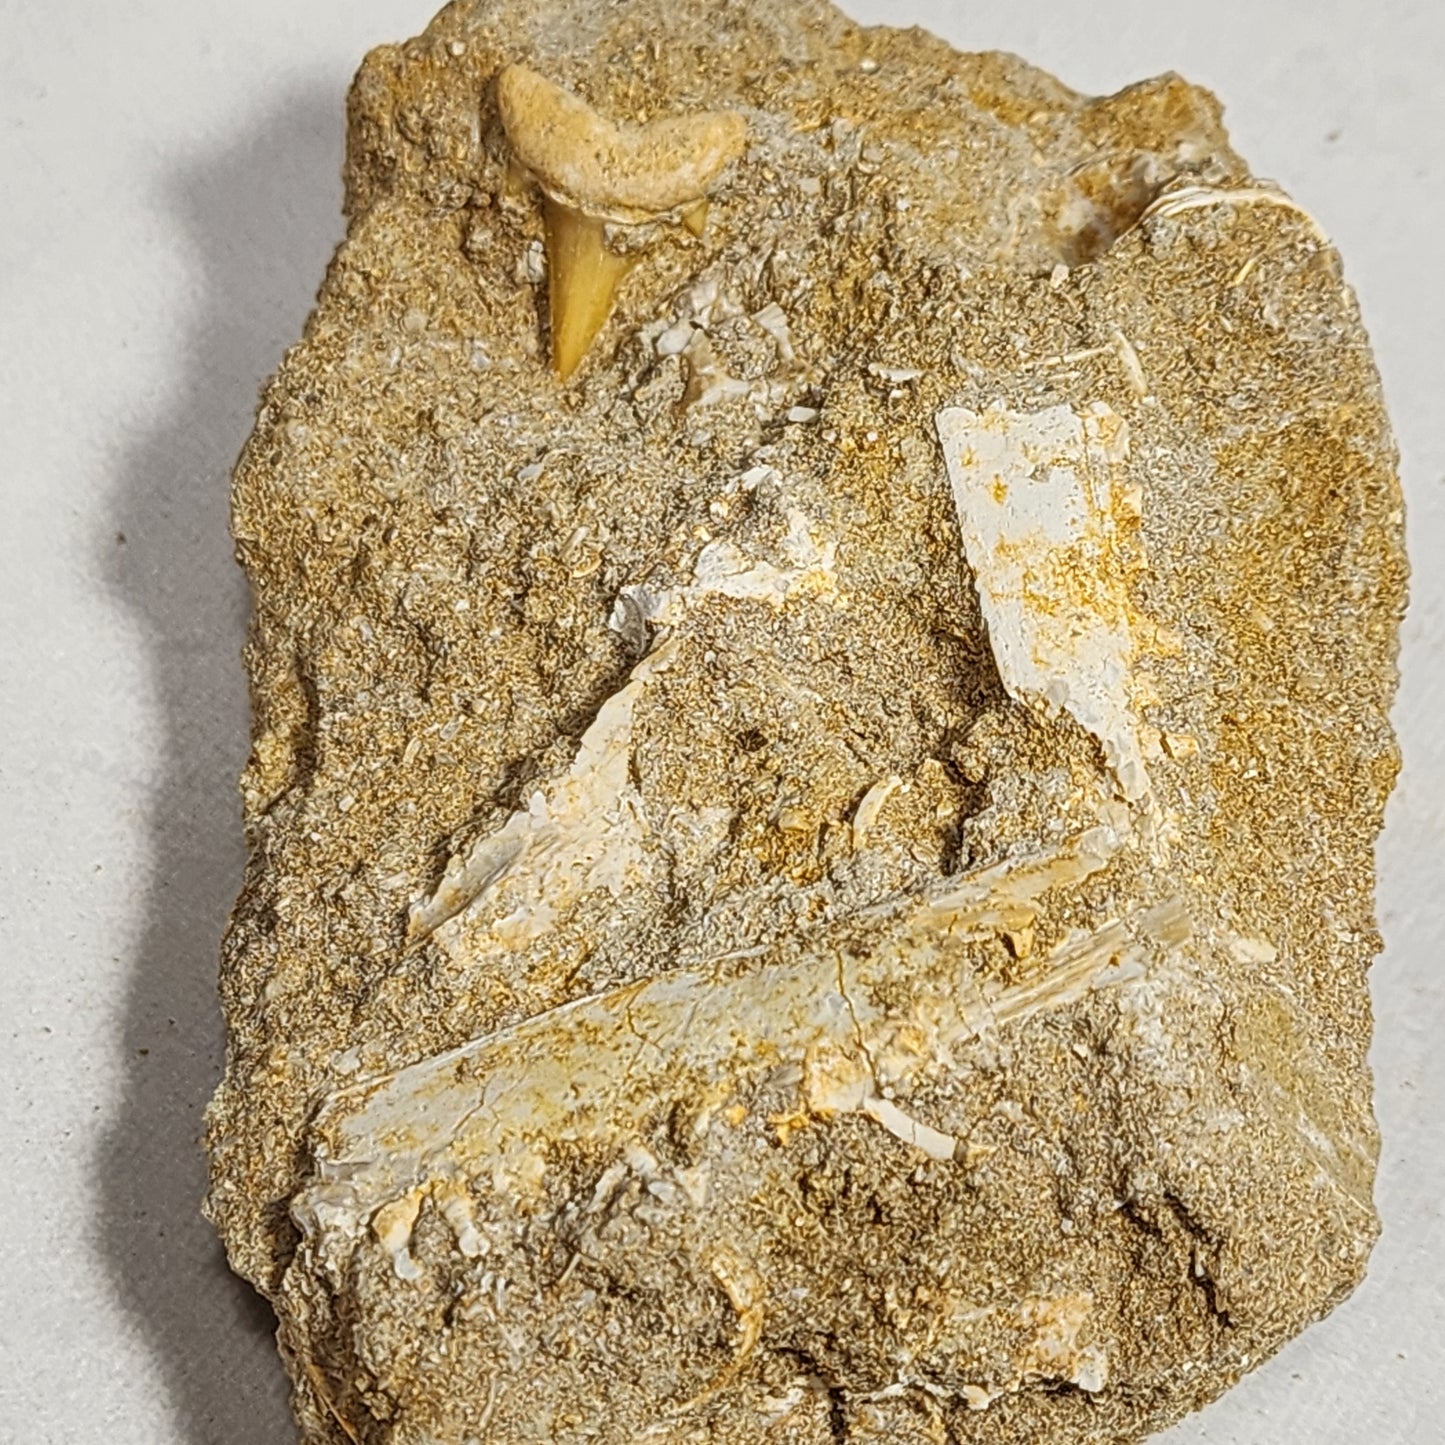 Saber Toothed Herring Fish Jaw in Matrix